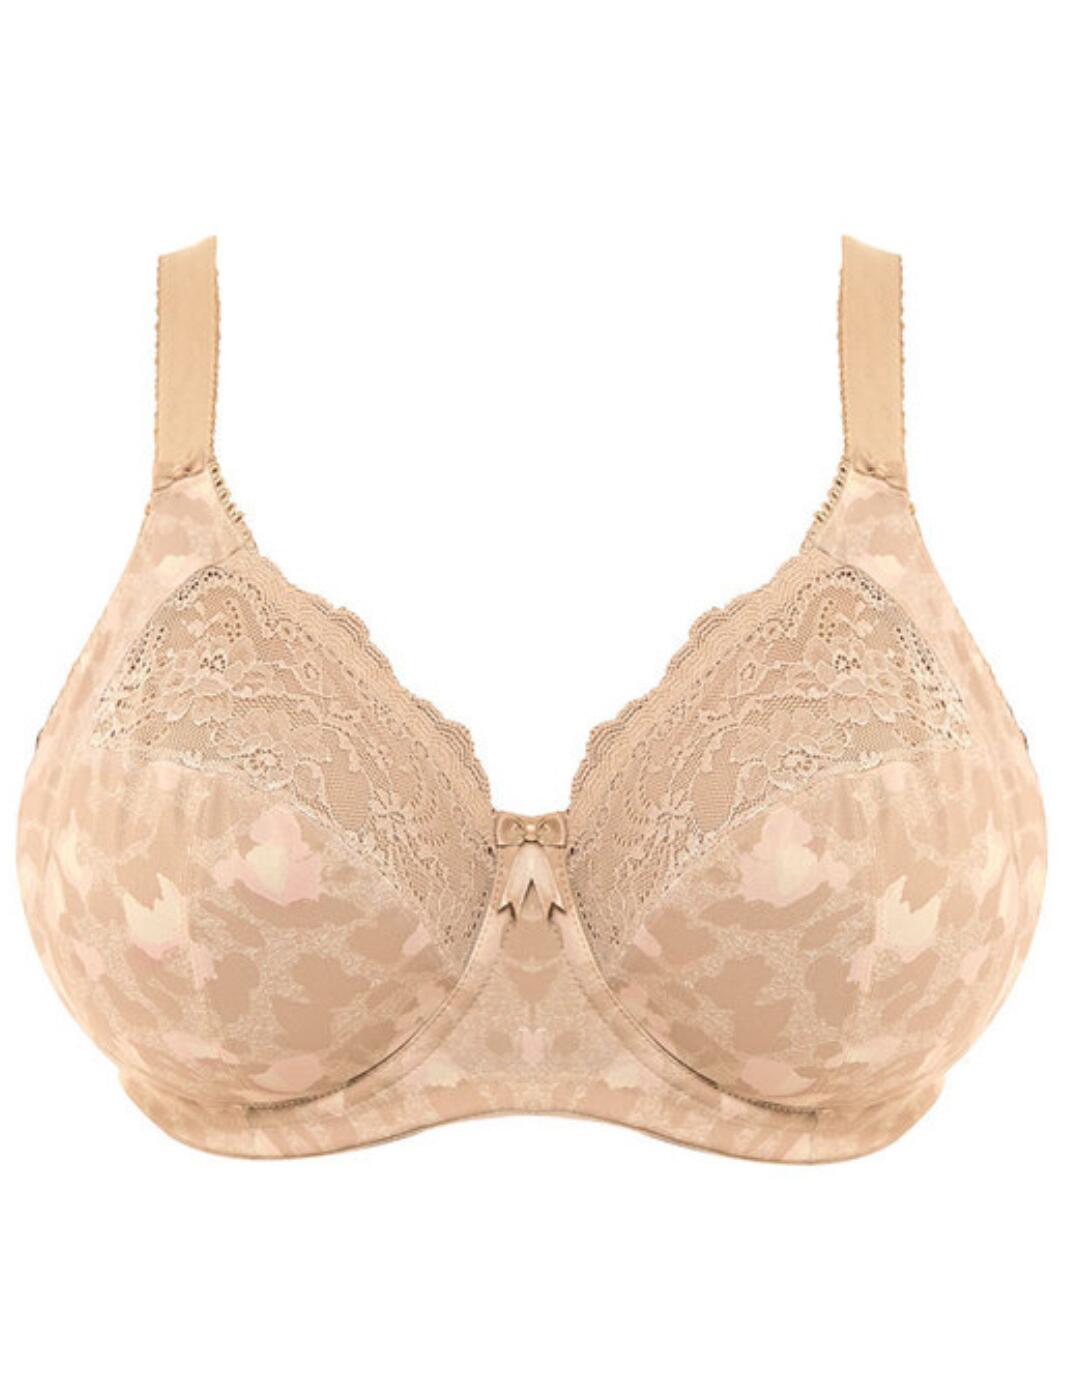 Elomi Morgan Stretch Lace Banded Underwire Bra (4111),40G,White 